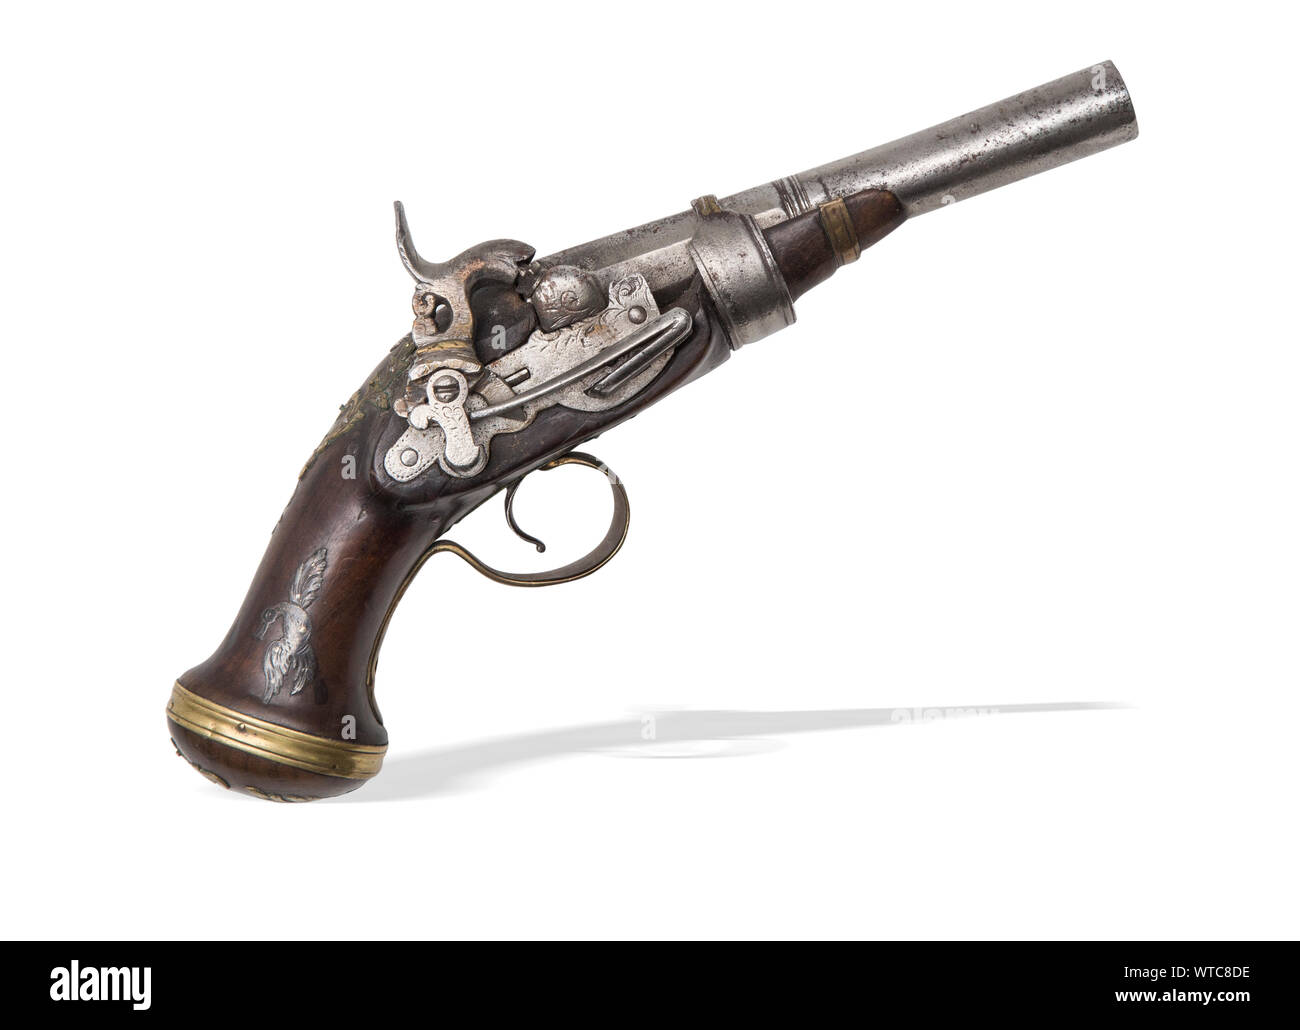 Percussion pistol of the 19th century. A conversion from 18th century flintlock pistol. Wooden stock decorated with silver and brass inlays. Stock Photo